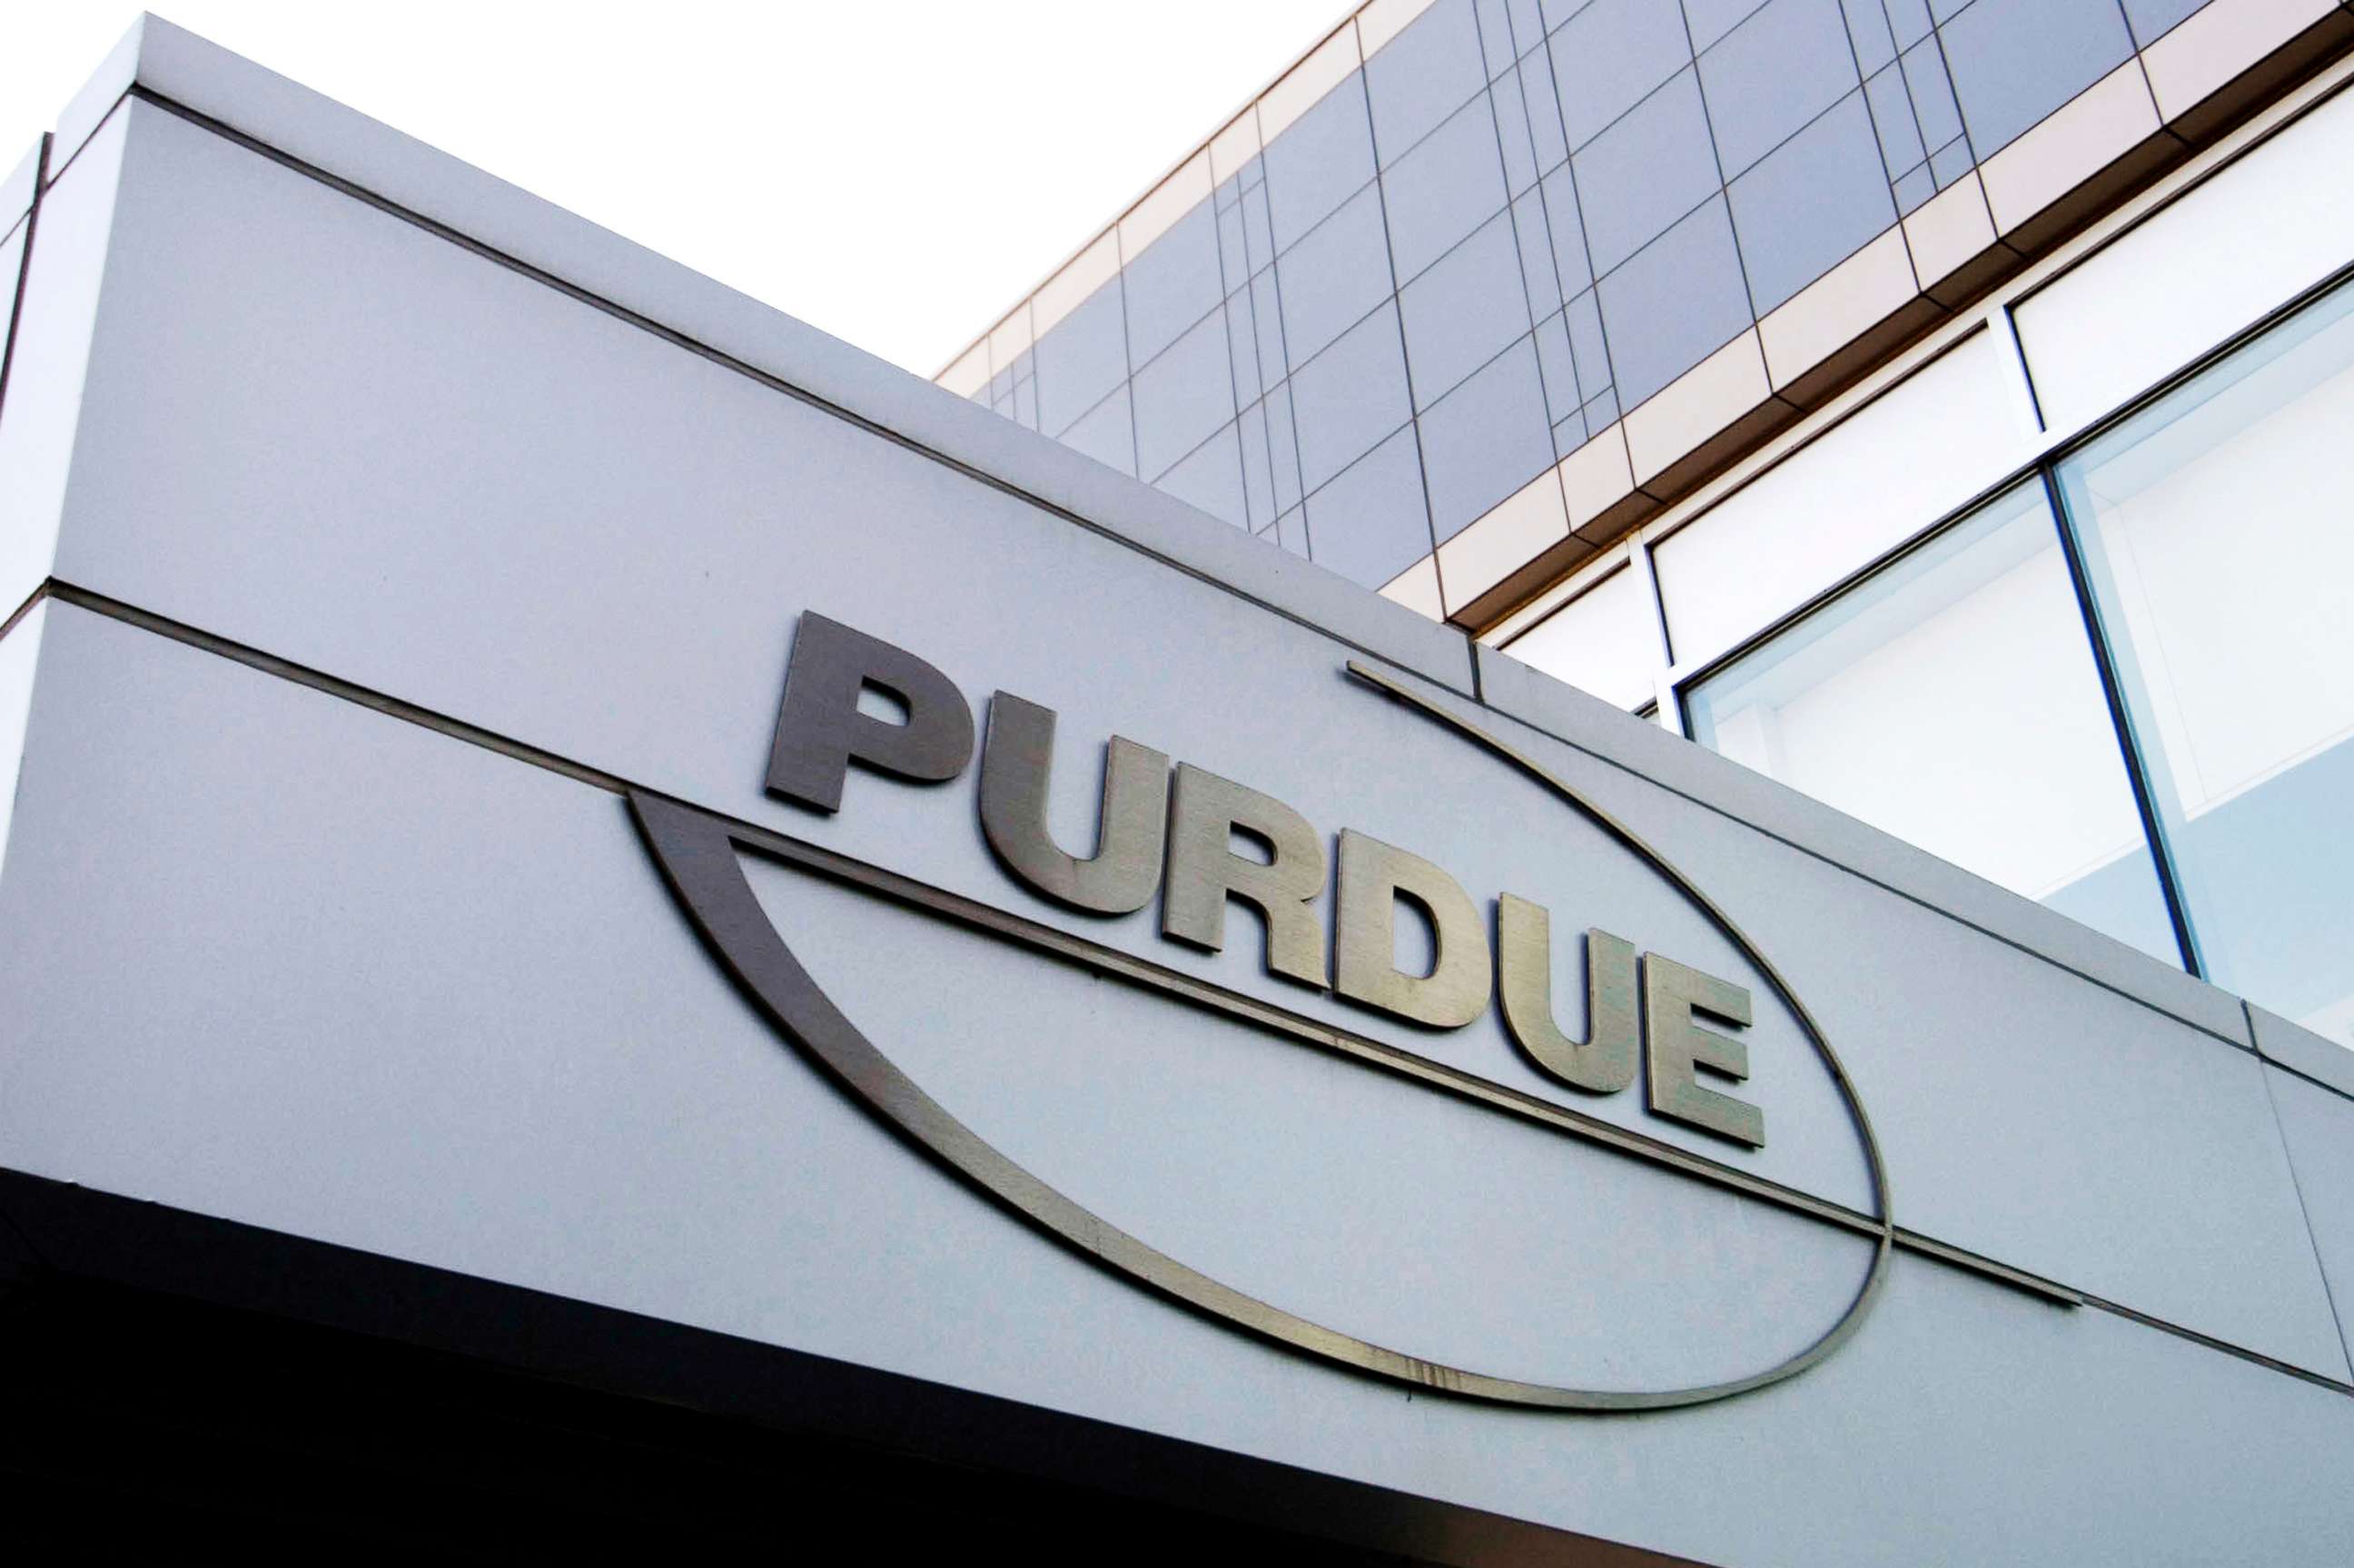 PHOTO: In this May 8, 2007, file photo, the Purdue Pharma logo is shown on the headquarters building in Stamford, Conn.